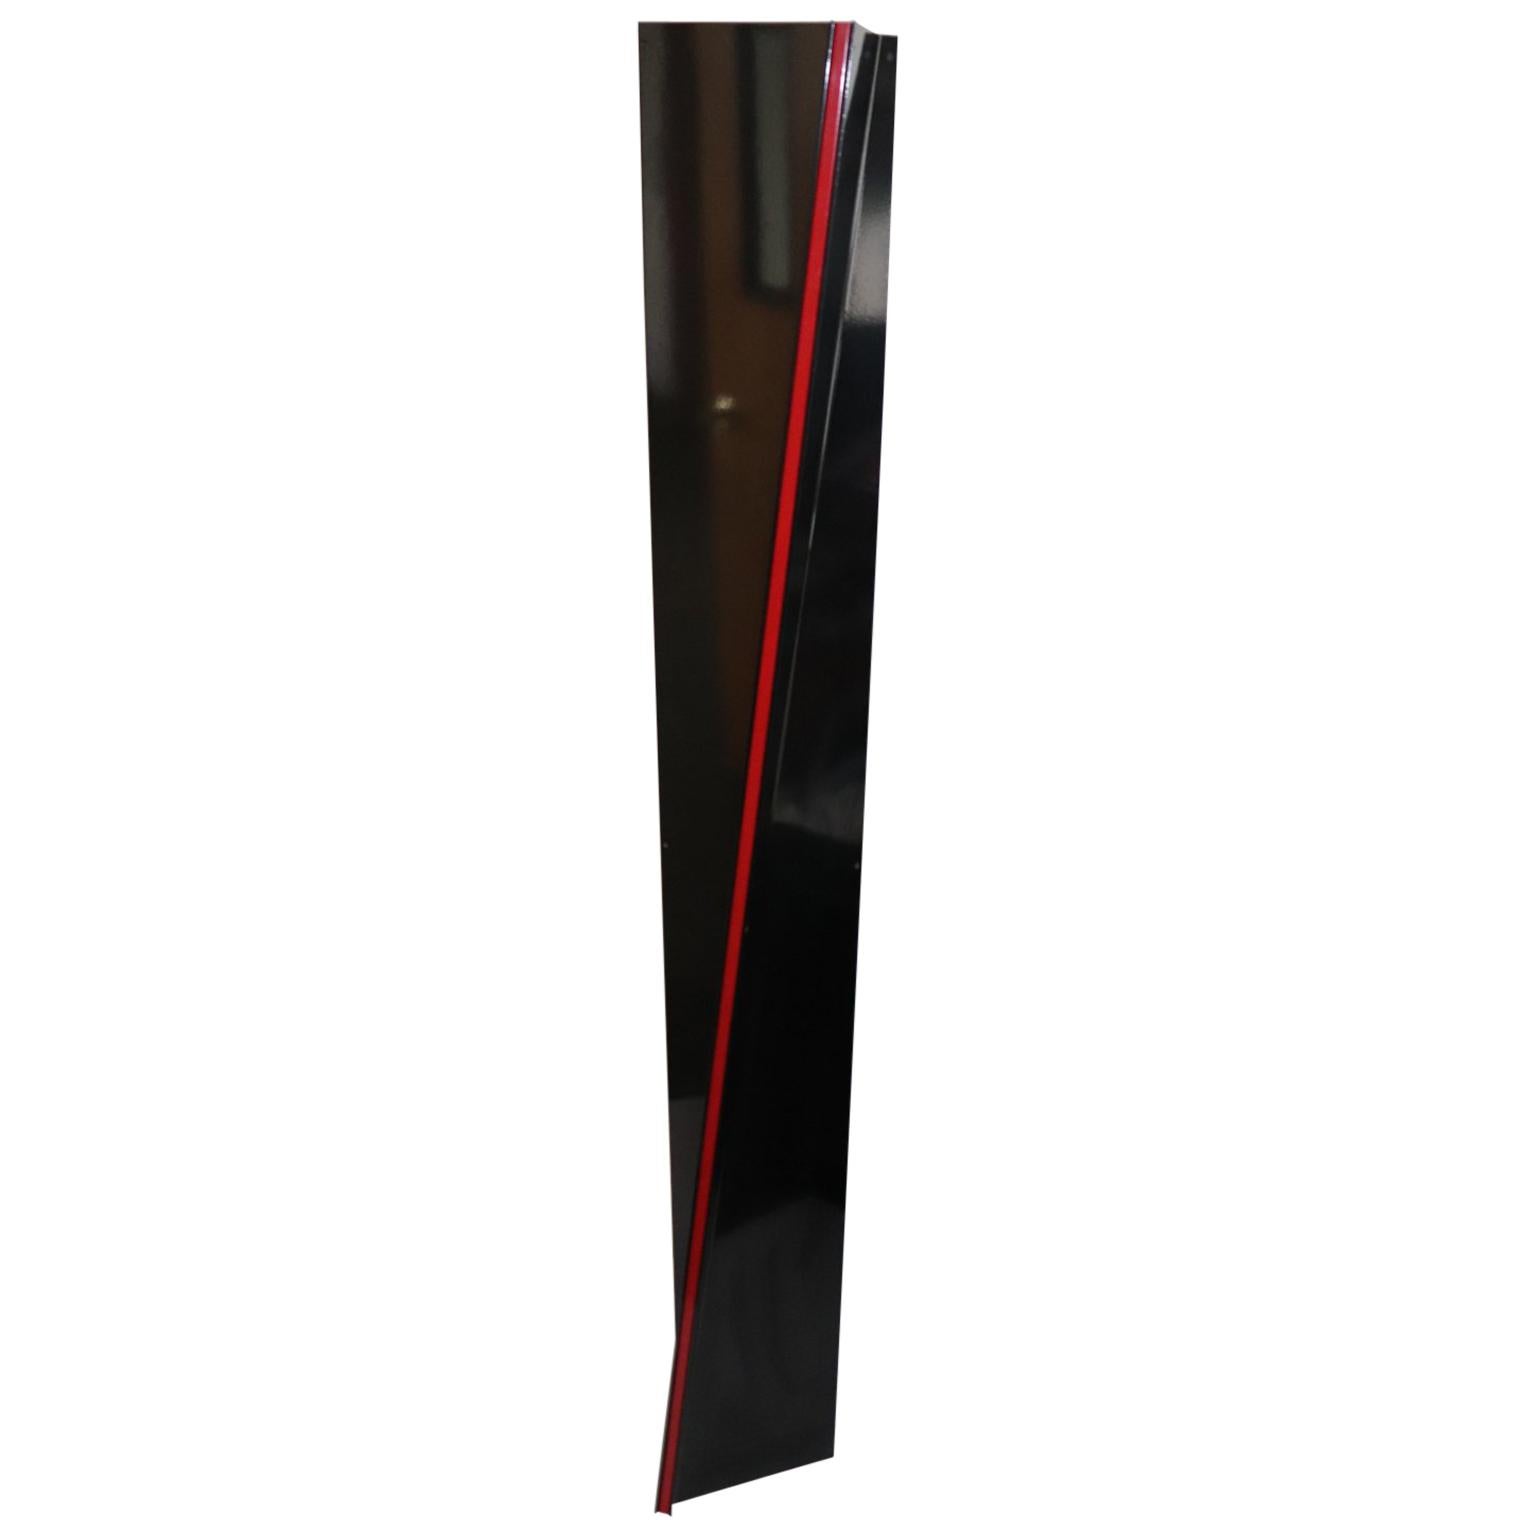 Mauro Marzollo Sculptured Floor Lamp Black with Red Stripes Details For Sale